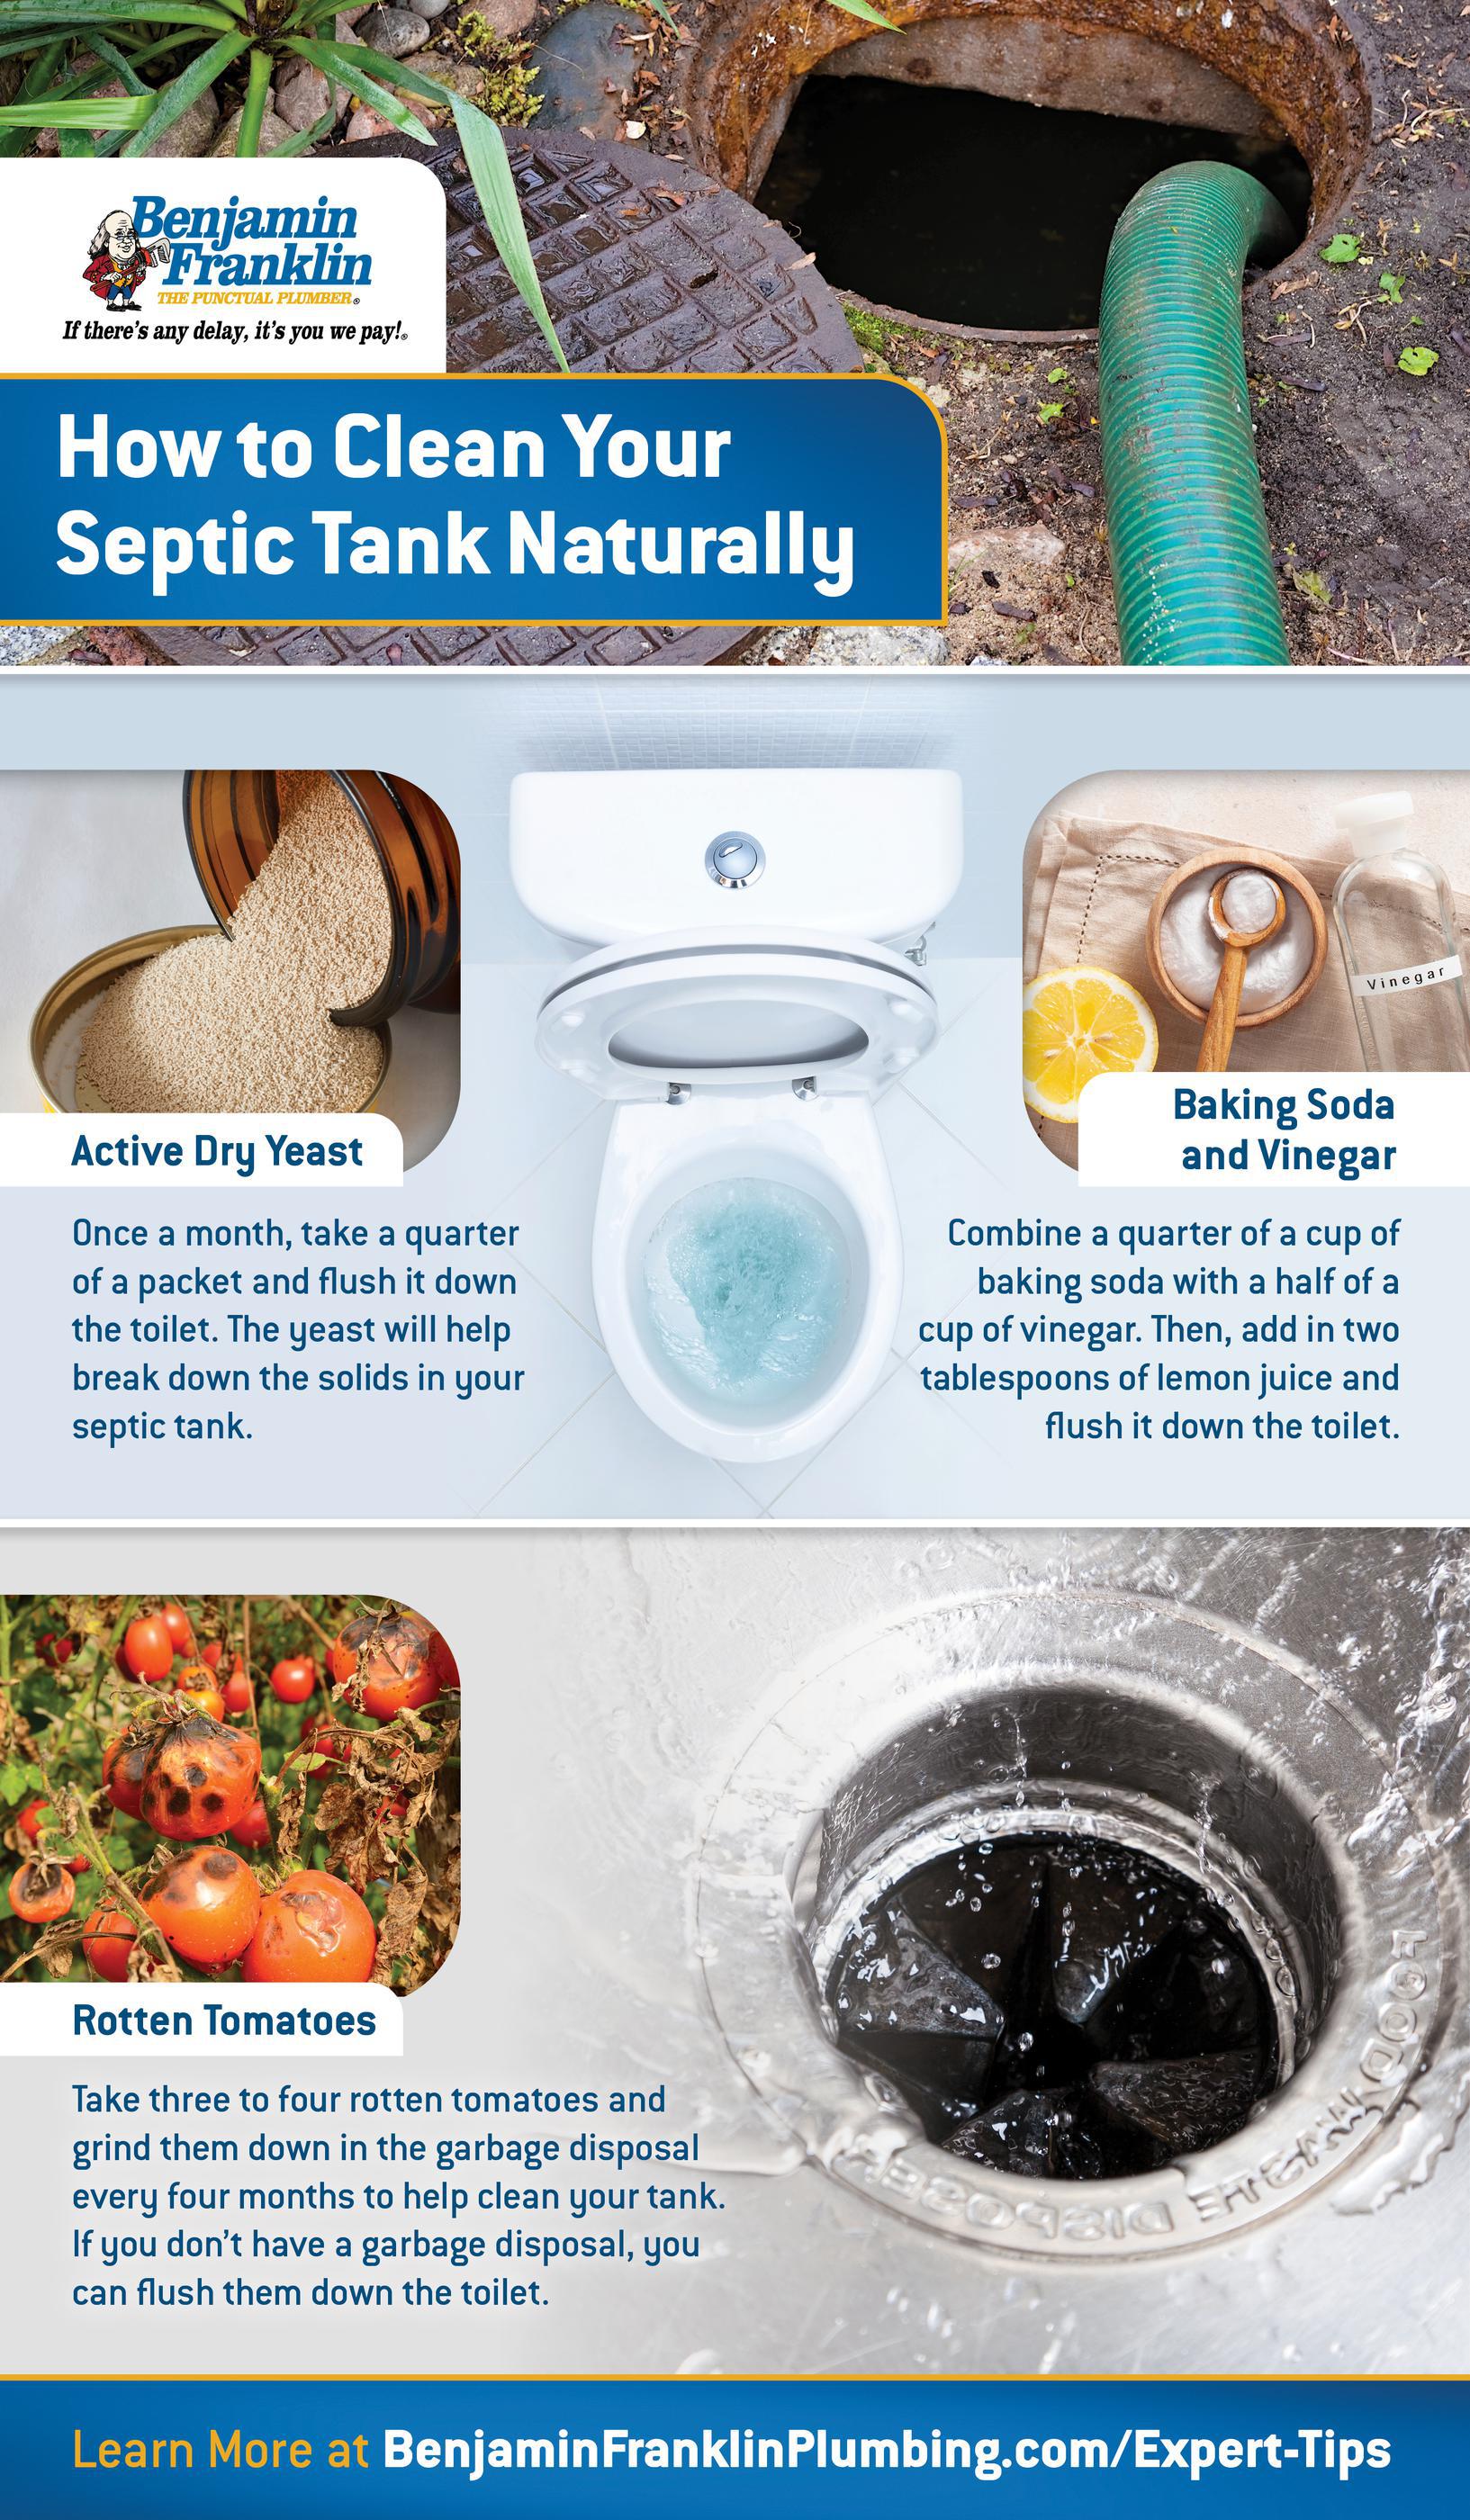 BFP Naturally Caring For Septic System Infographic 742831850